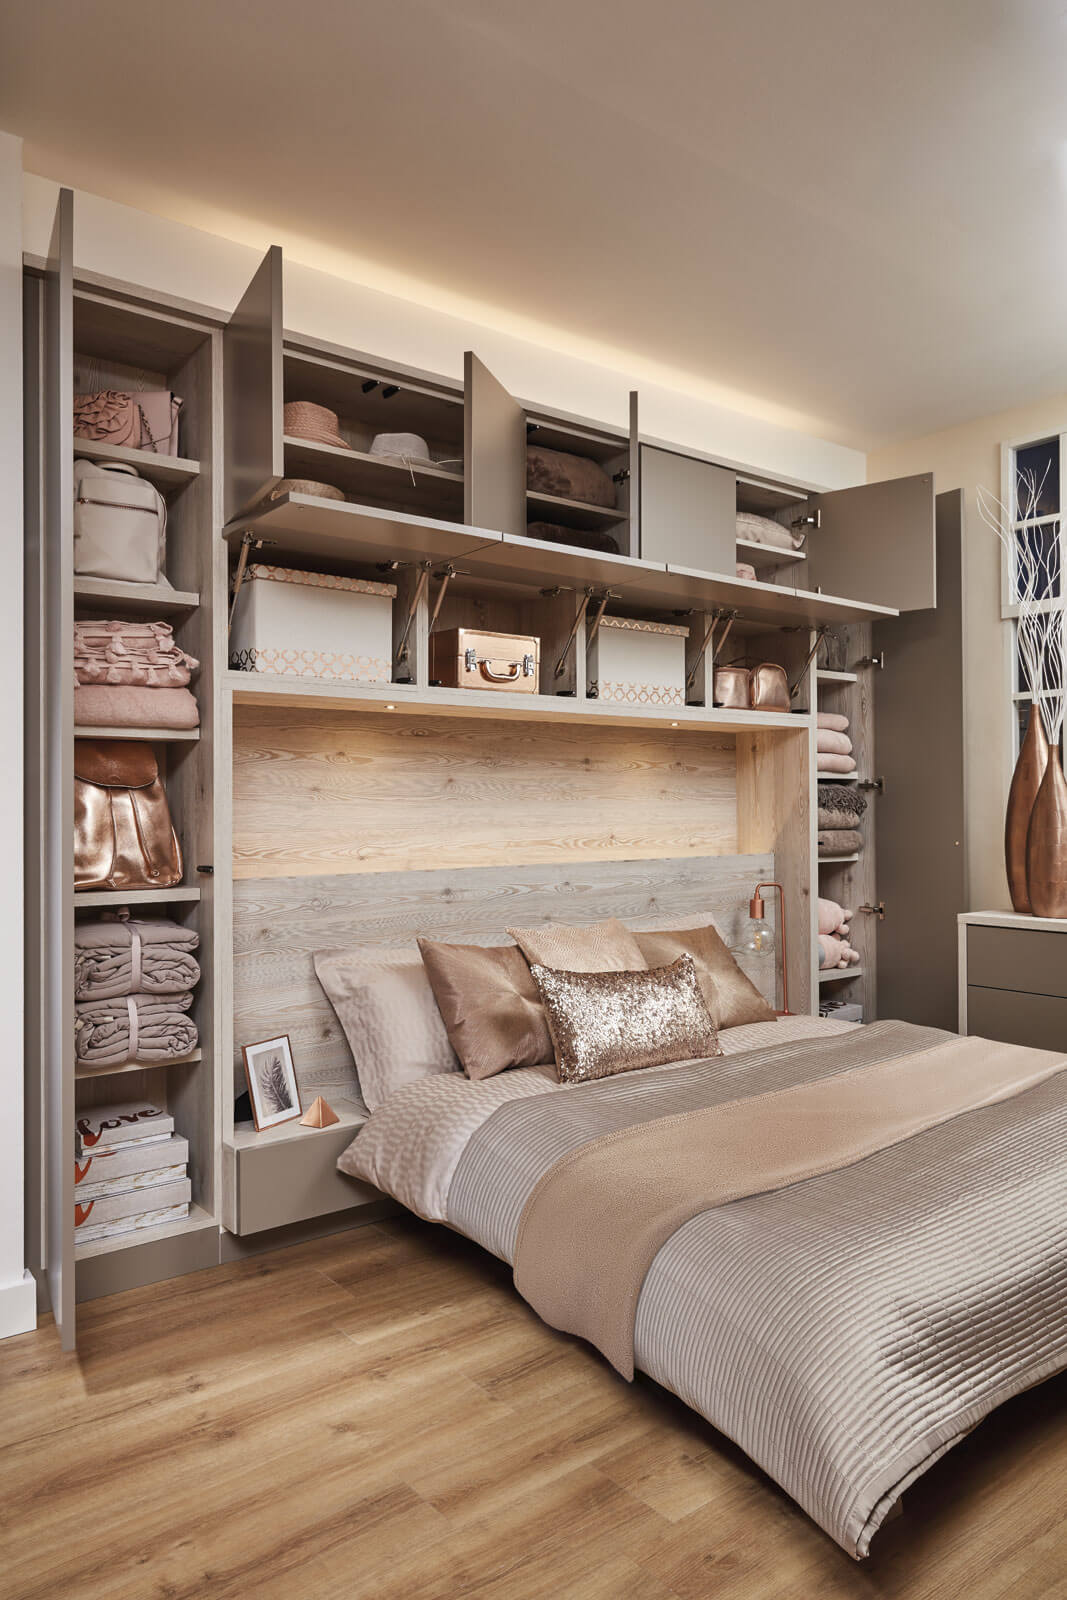 Make your home feel more spacious and organised with these clever storage ideas